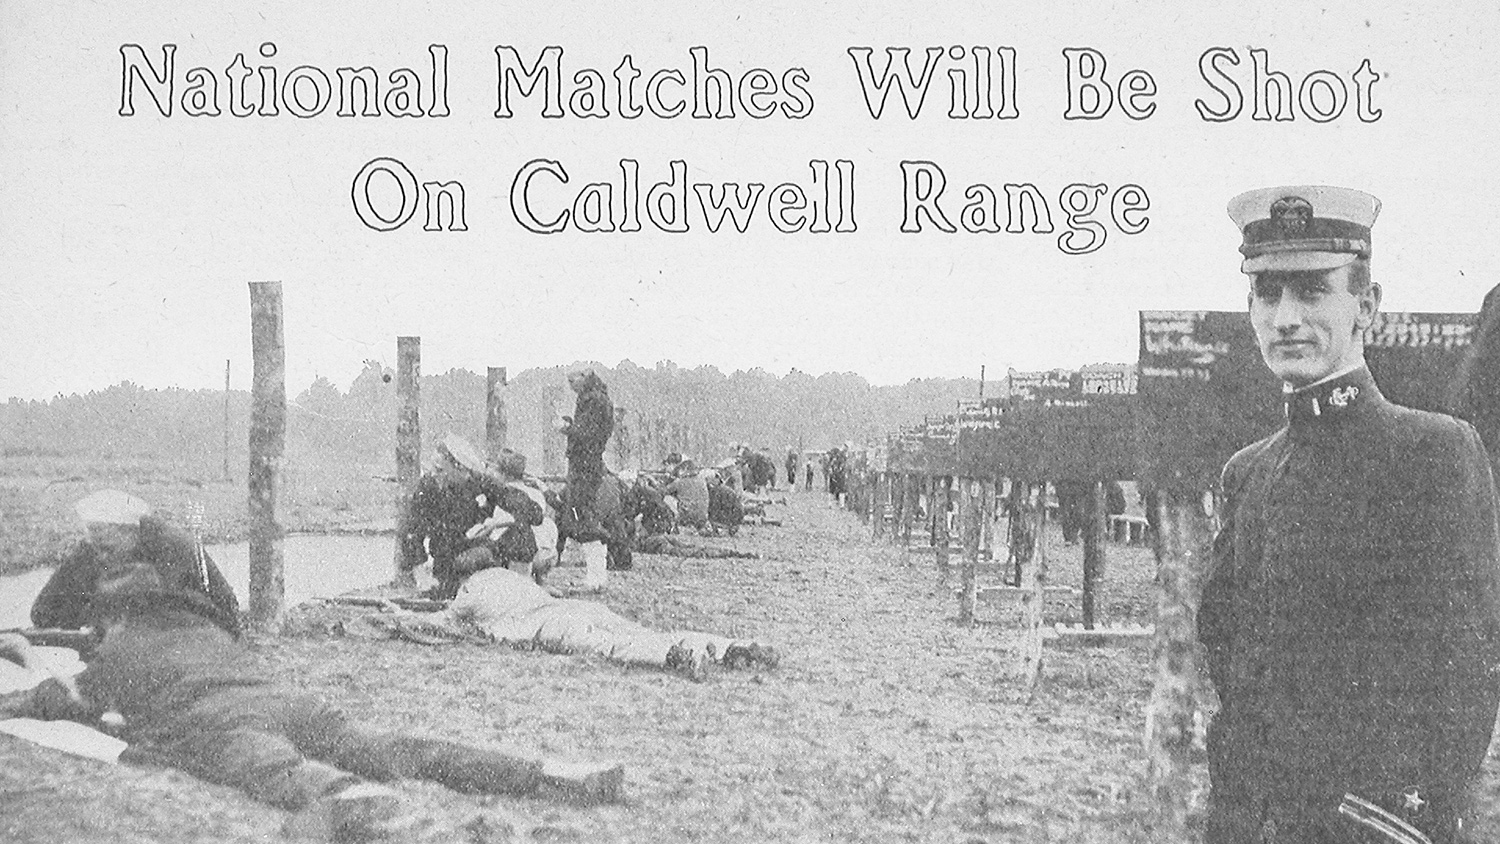 1919 NRA National Matches Caldwell